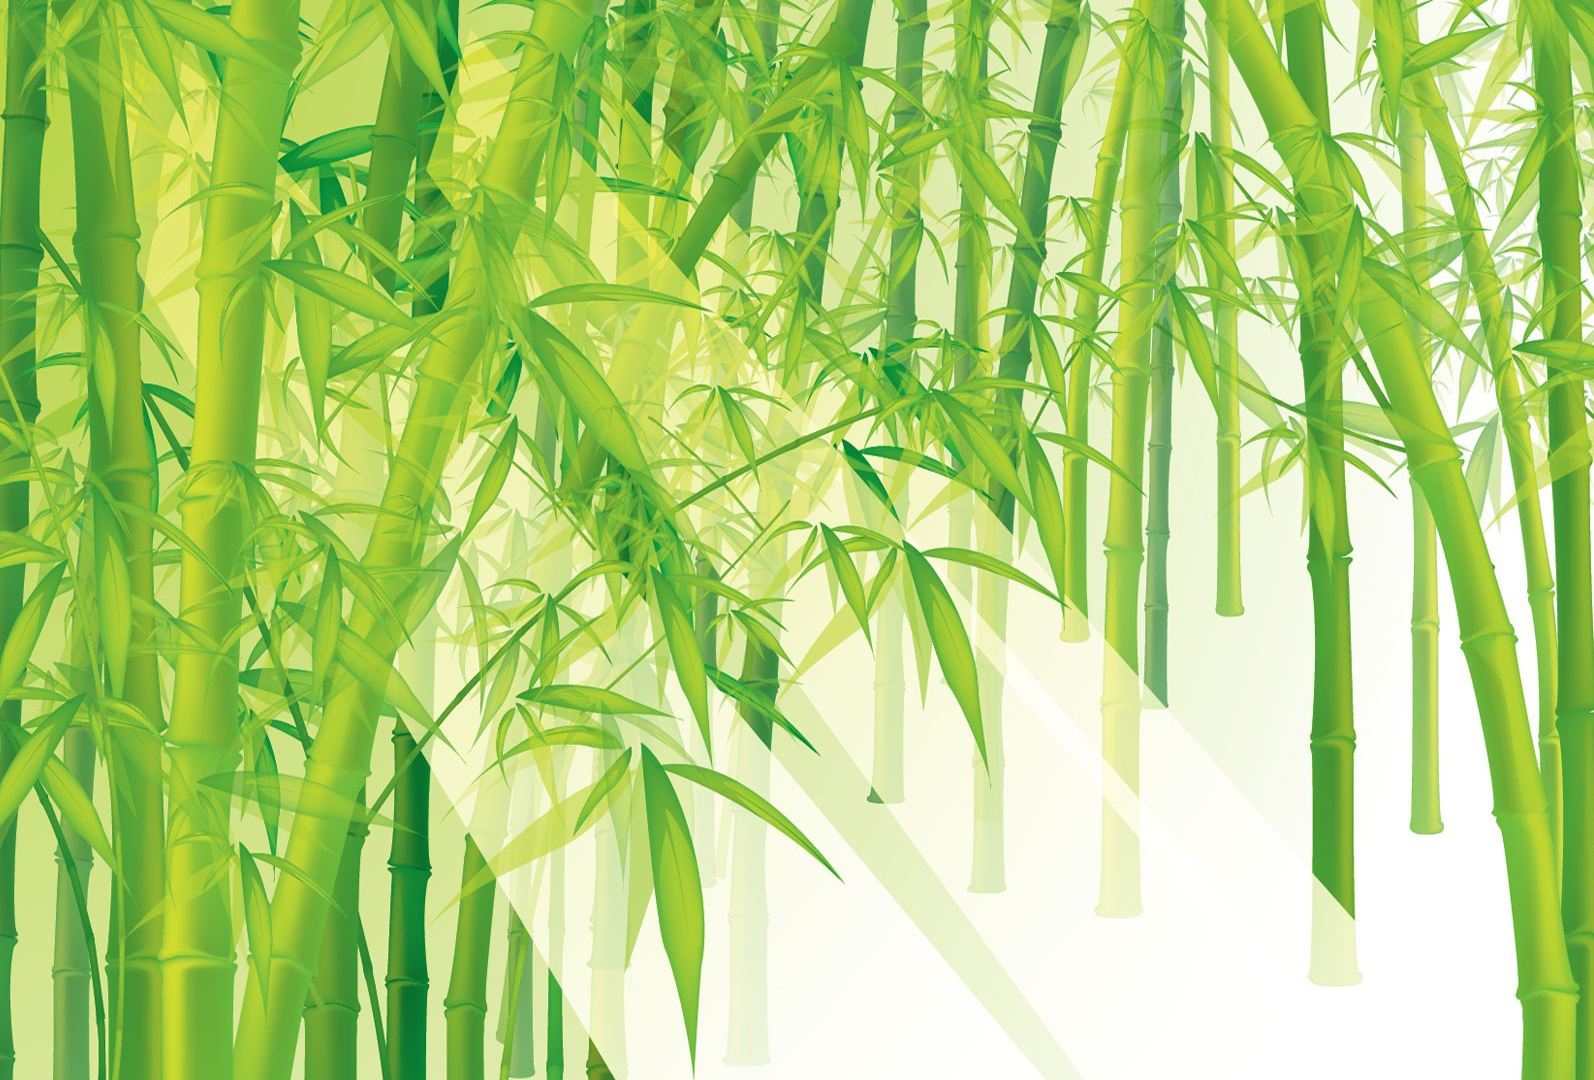 ppt-bamboo-template-bamboo-template-wallpaper-backgrounds-for